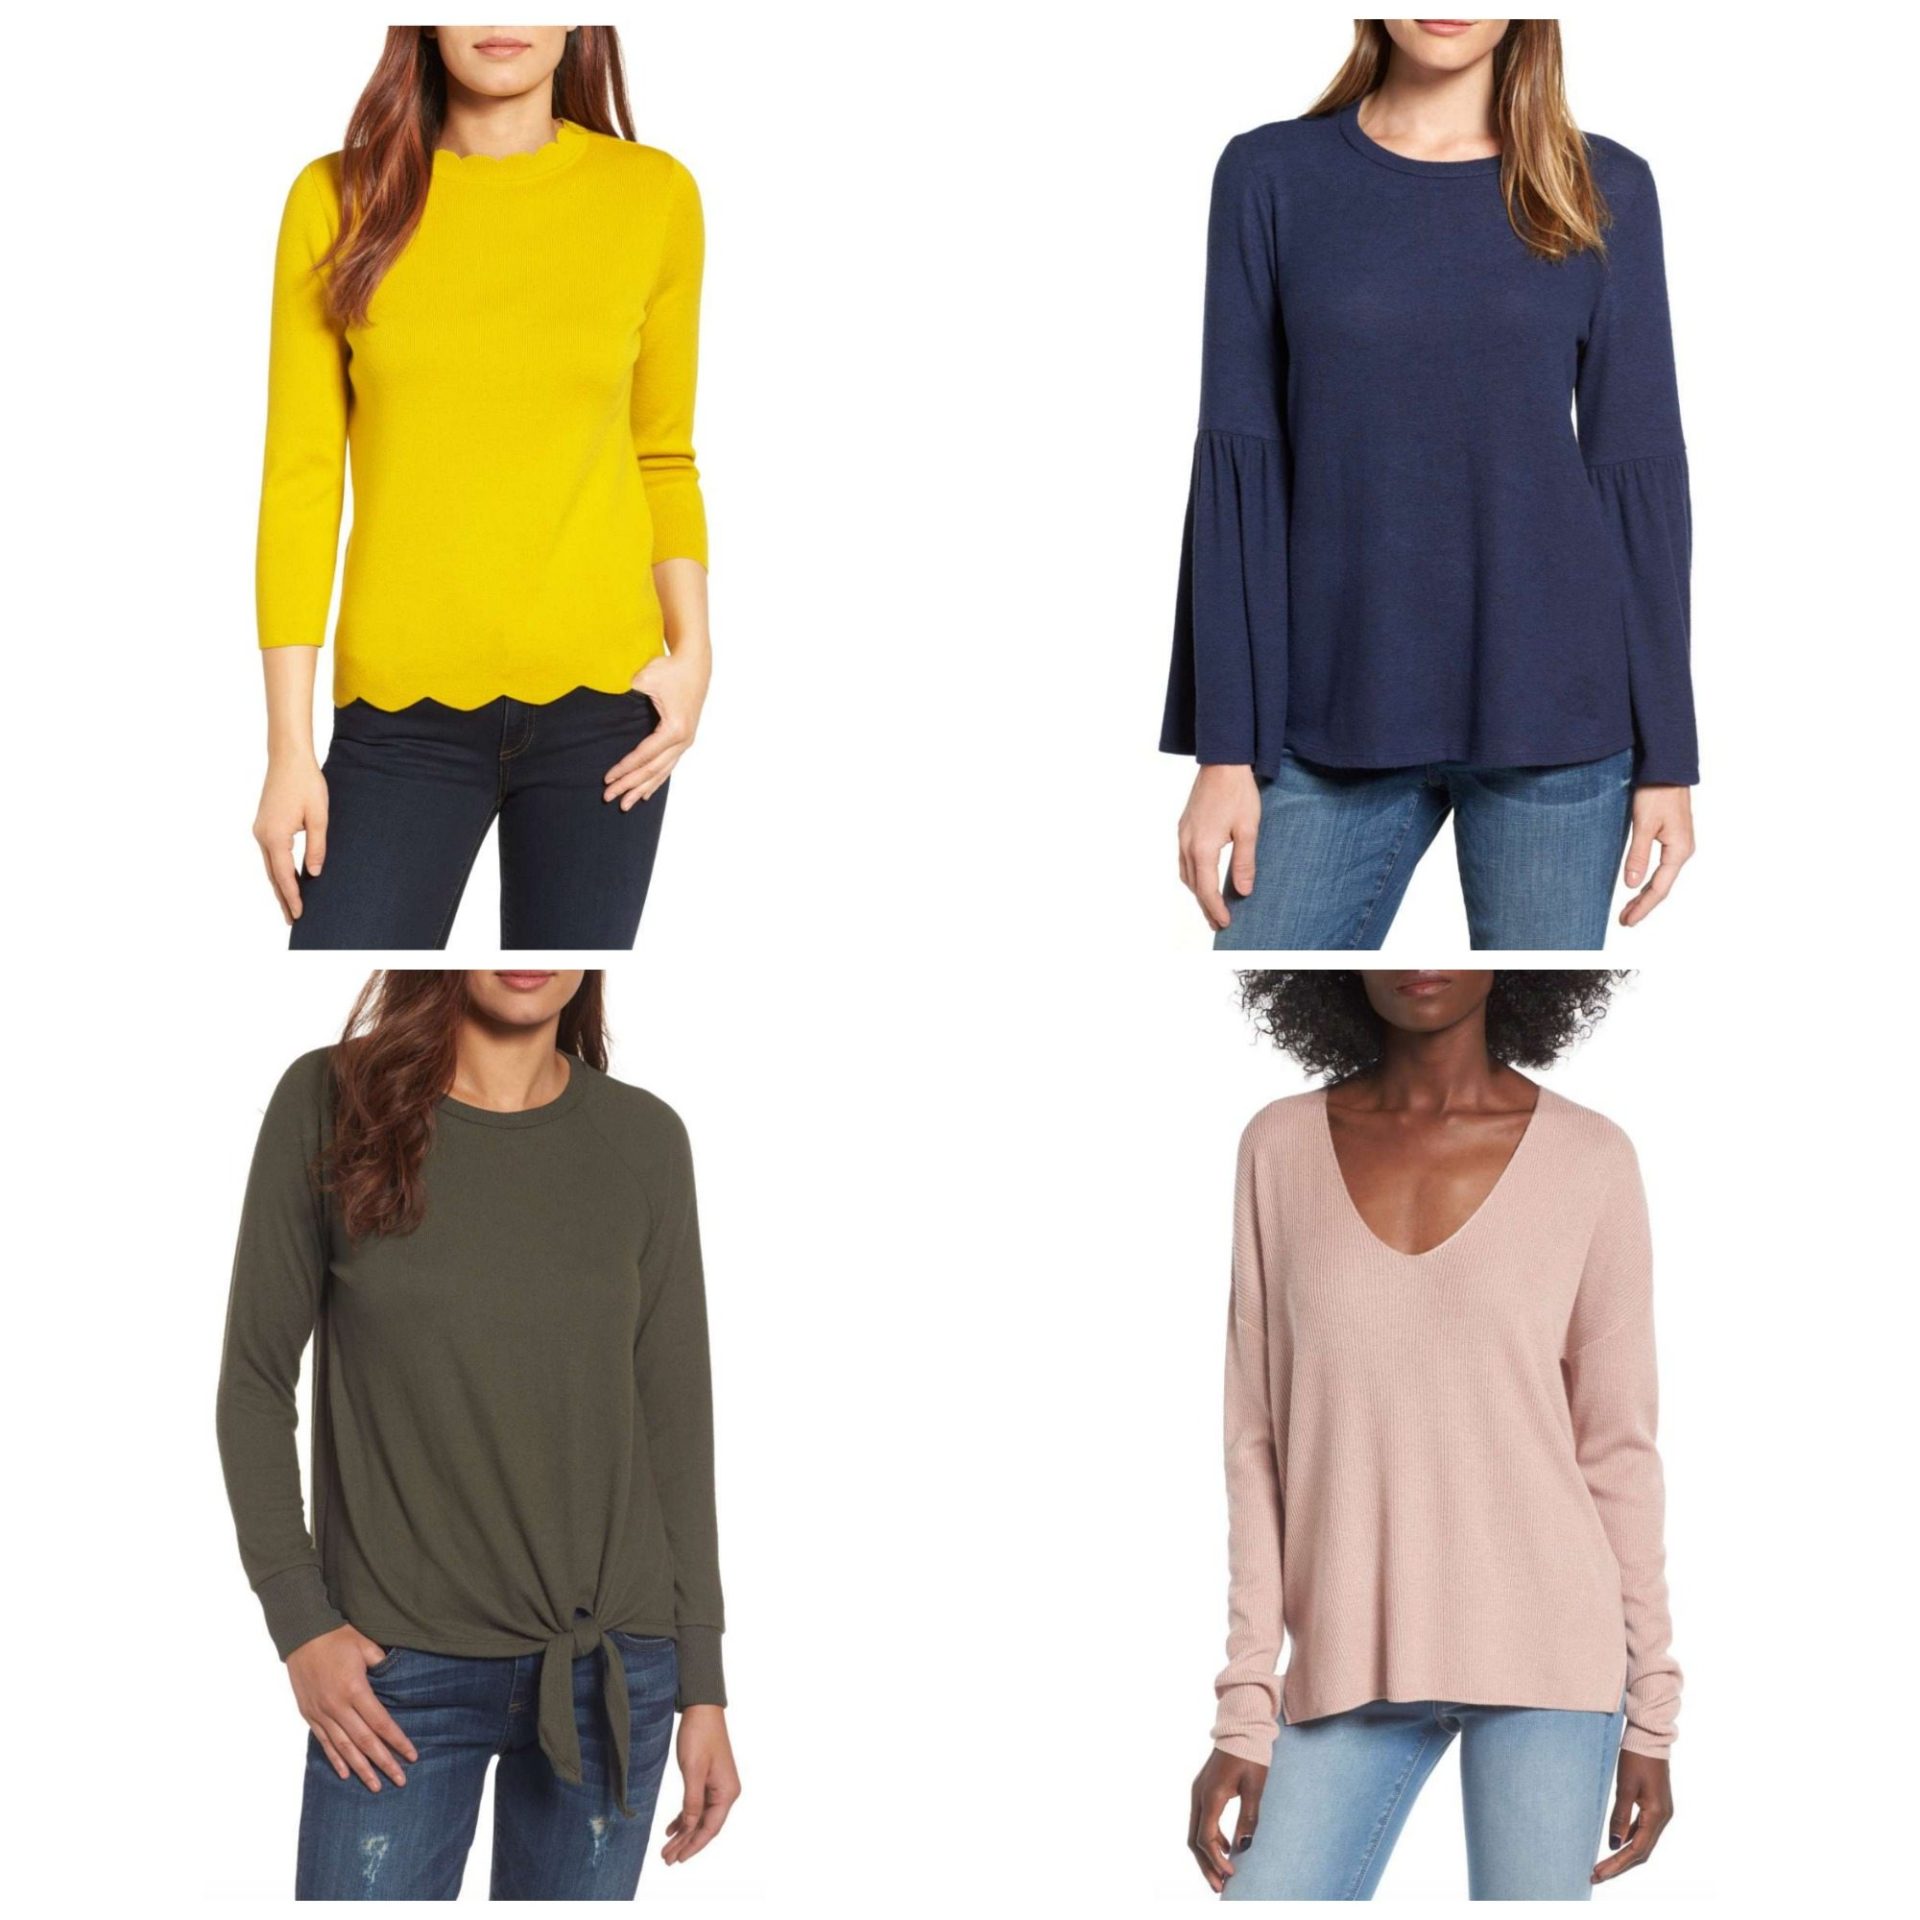 My Top 100 Picks From The Nordstrom Anniversary Sale! | Living in Yellow